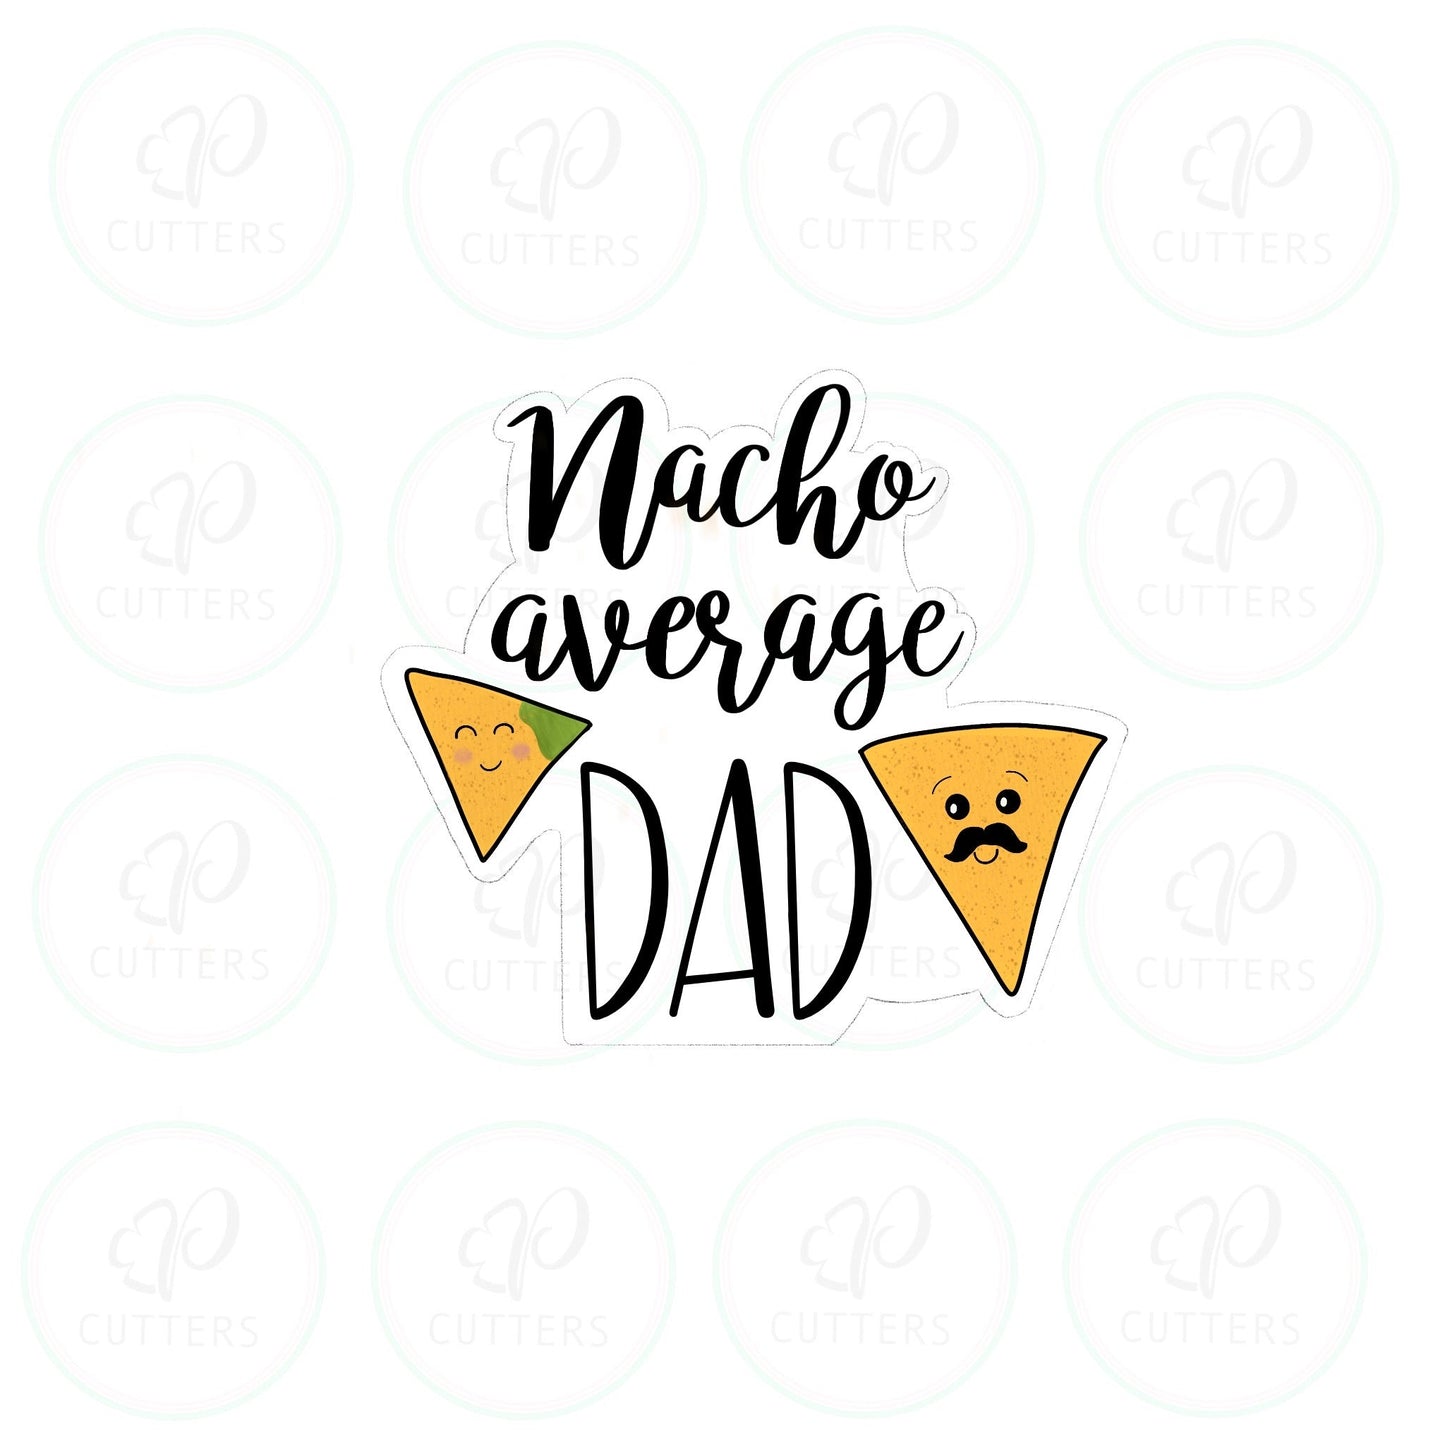 Nacho Average Dad Plaque Cookie Cutter - Periwinkles Cutters